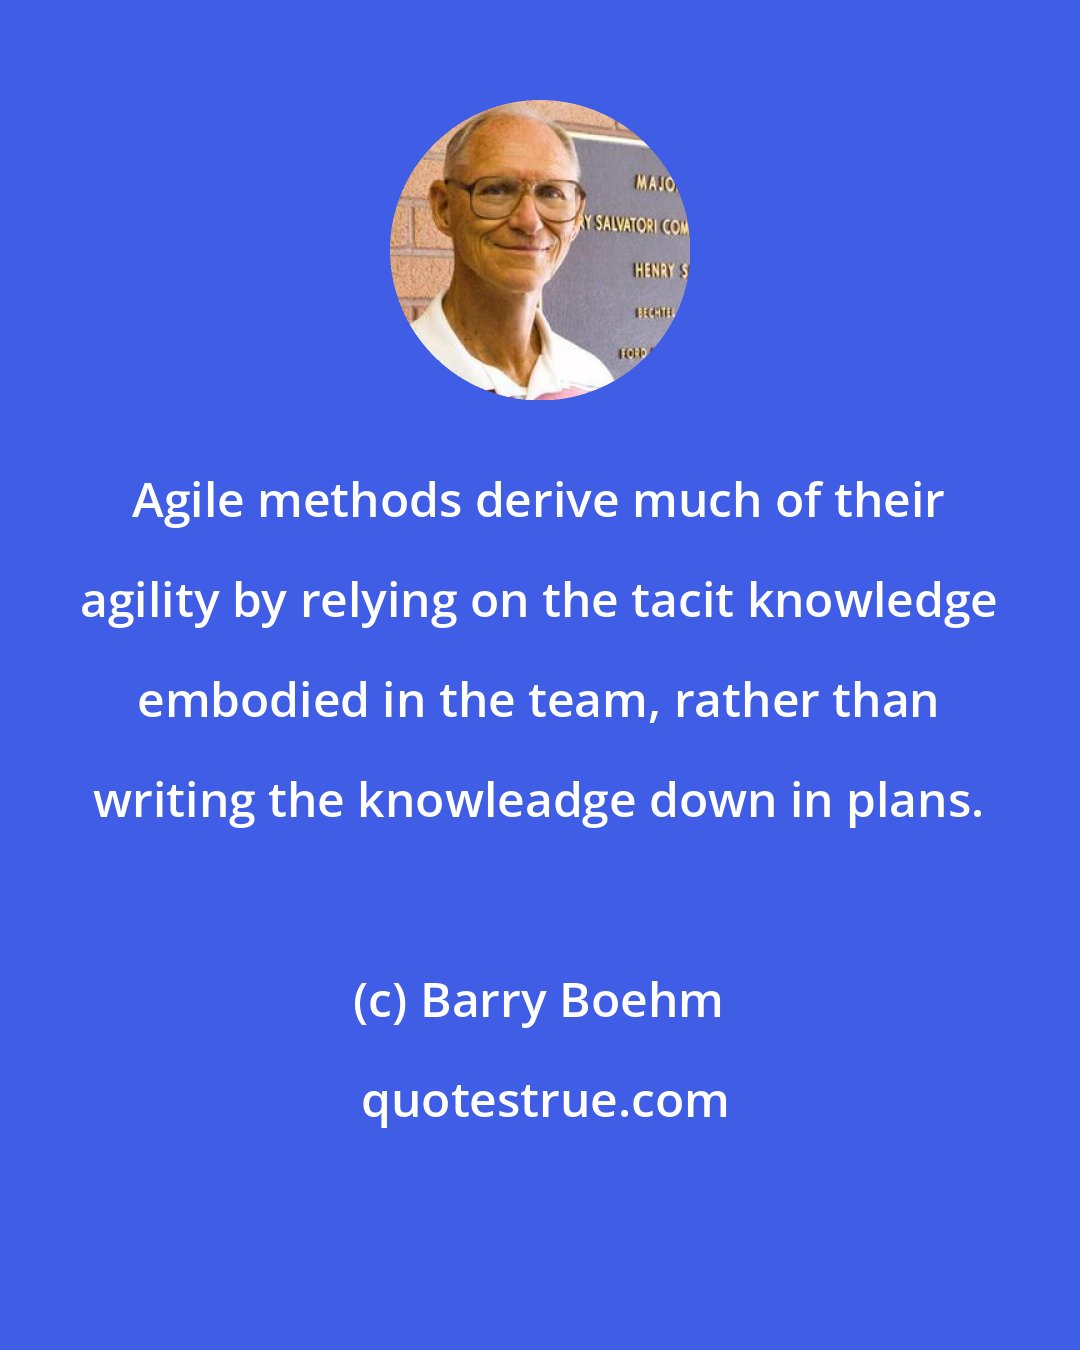 Barry Boehm: Agile methods derive much of their agility by relying on the tacit knowledge embodied in the team, rather than writing the knowleadge down in plans.